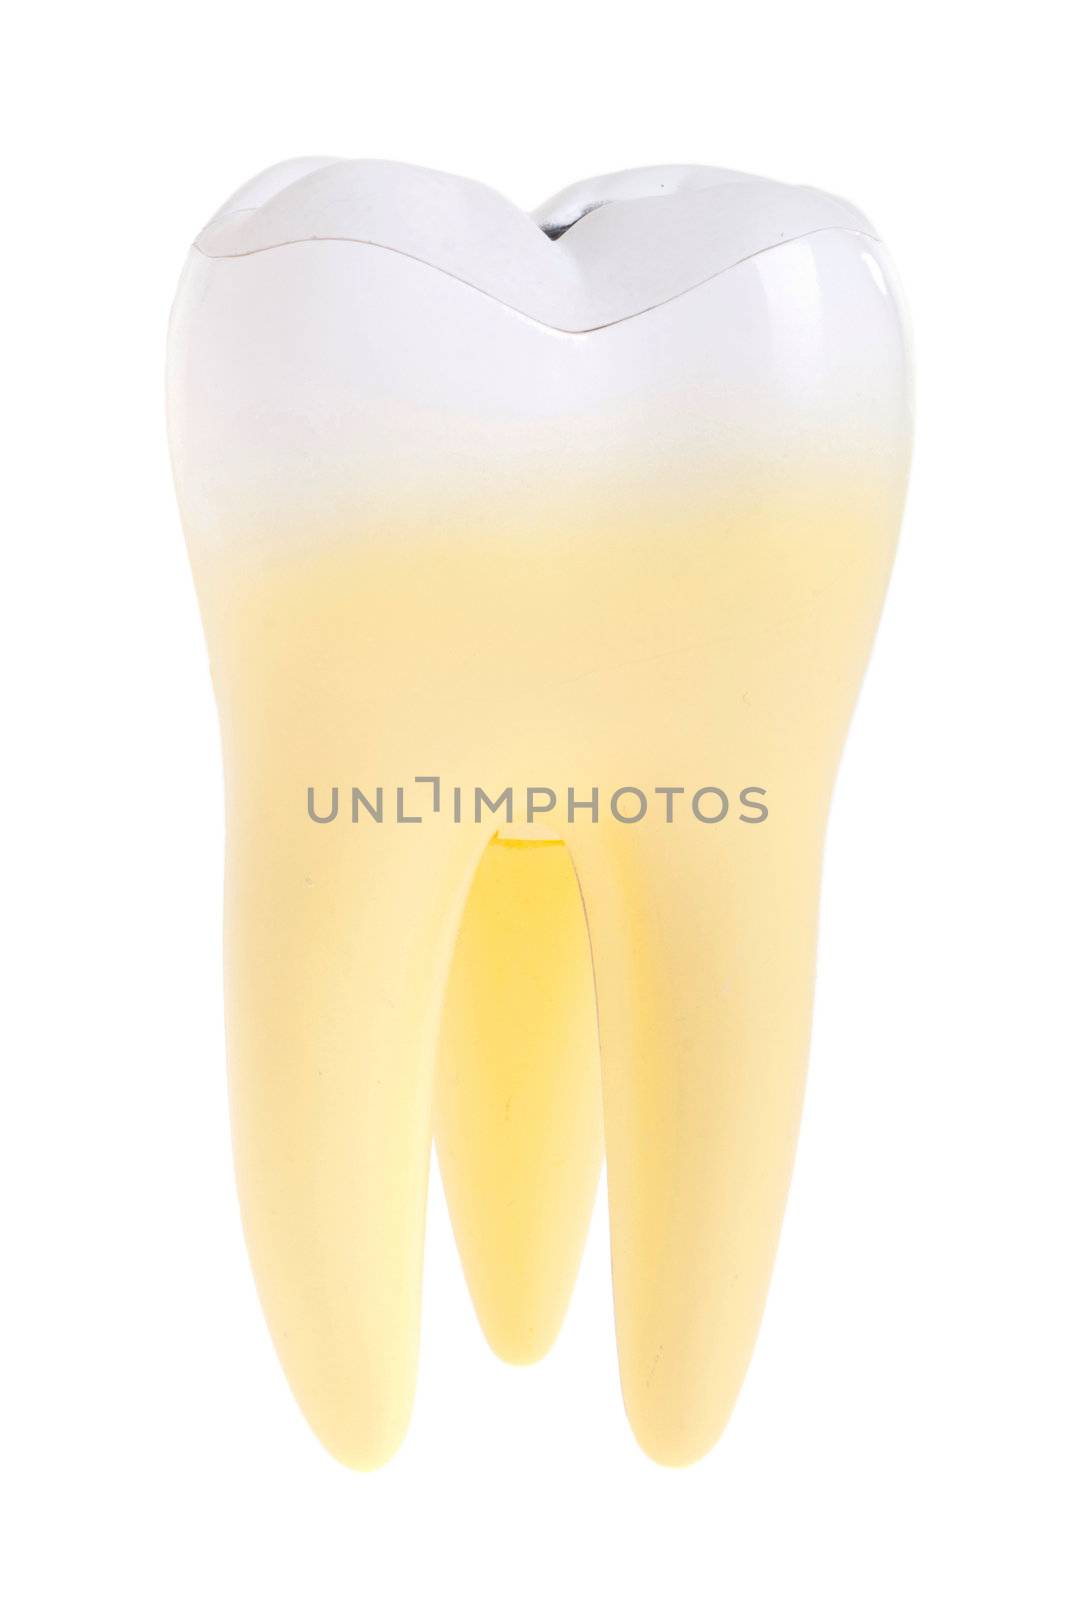 gorgeous molar tooth isolated on white background